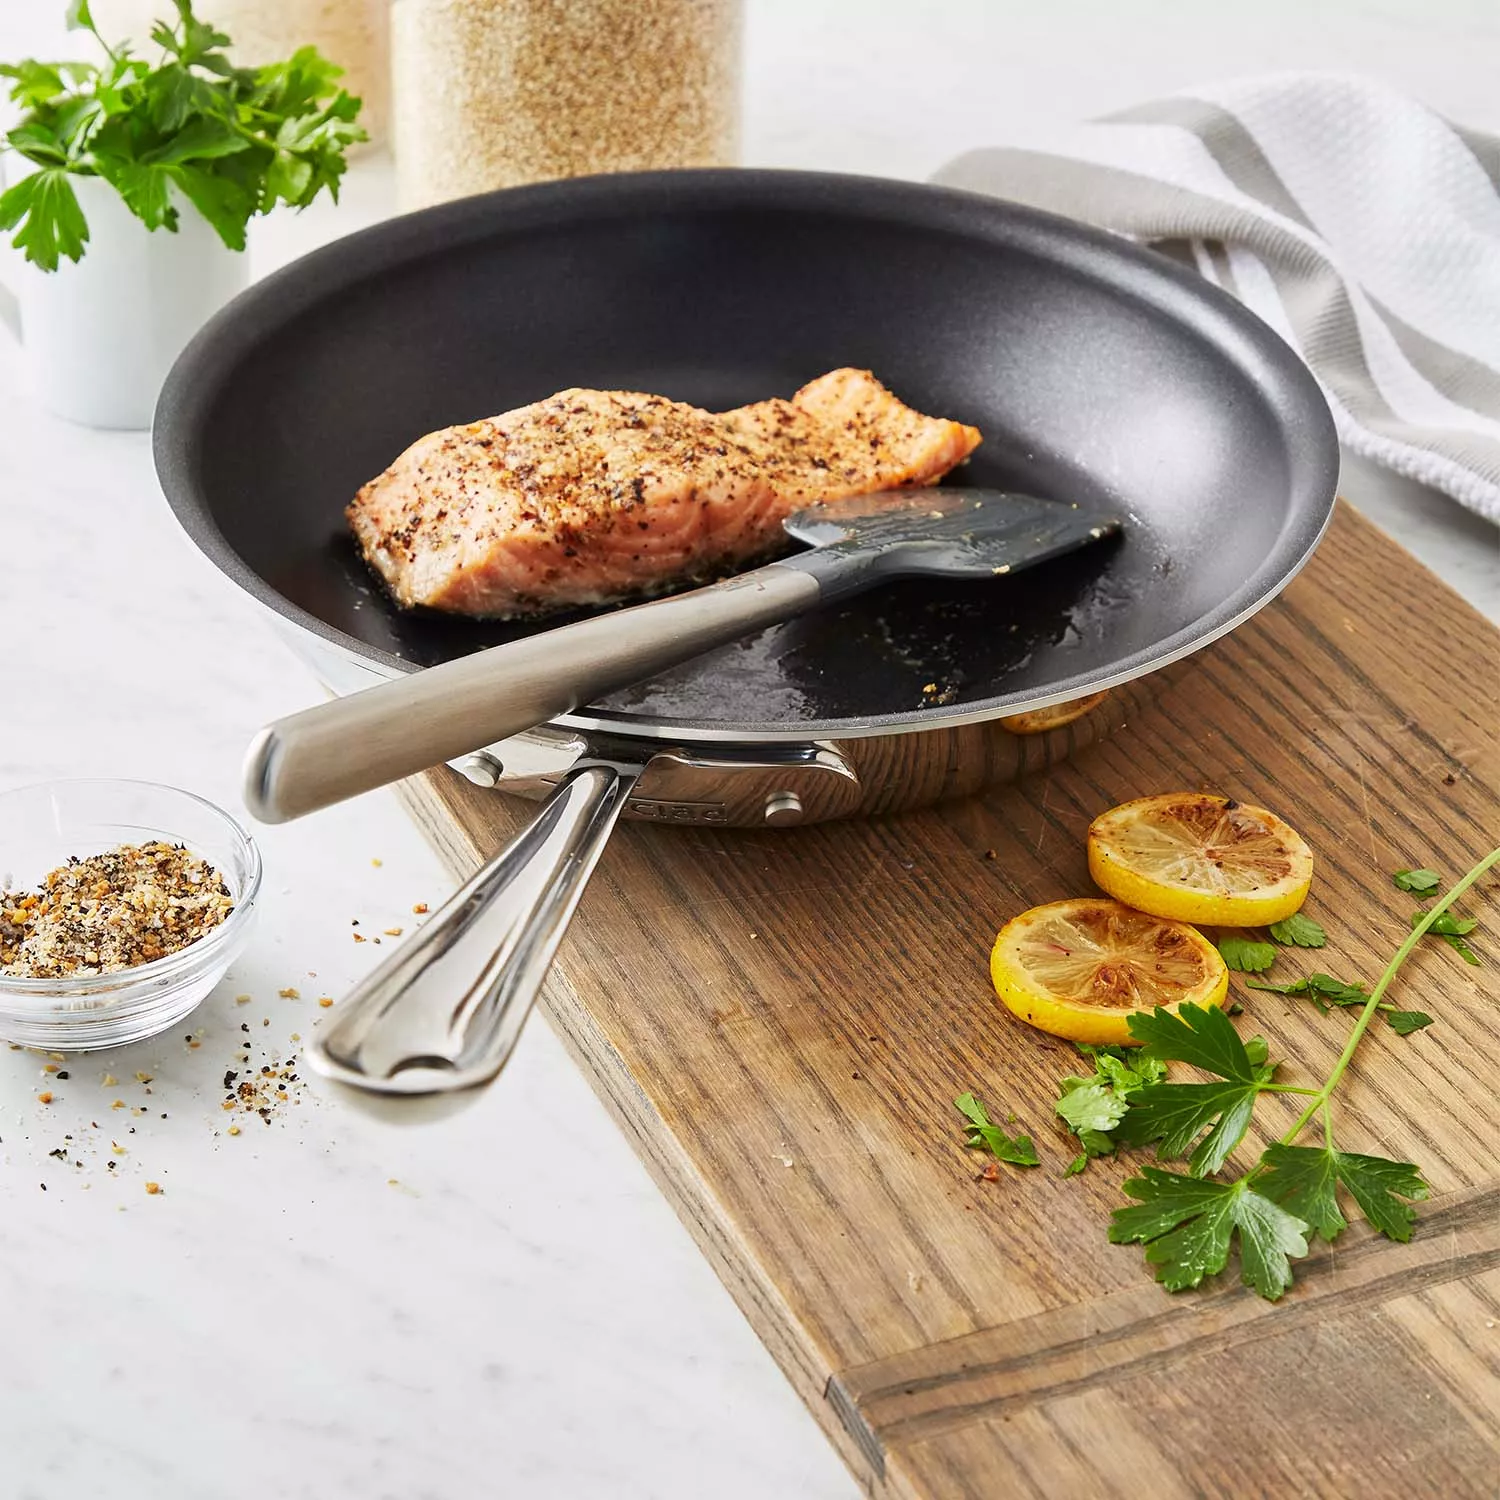 All-Clad d3 Stainless 10 Fry Pan with Lid + Reviews